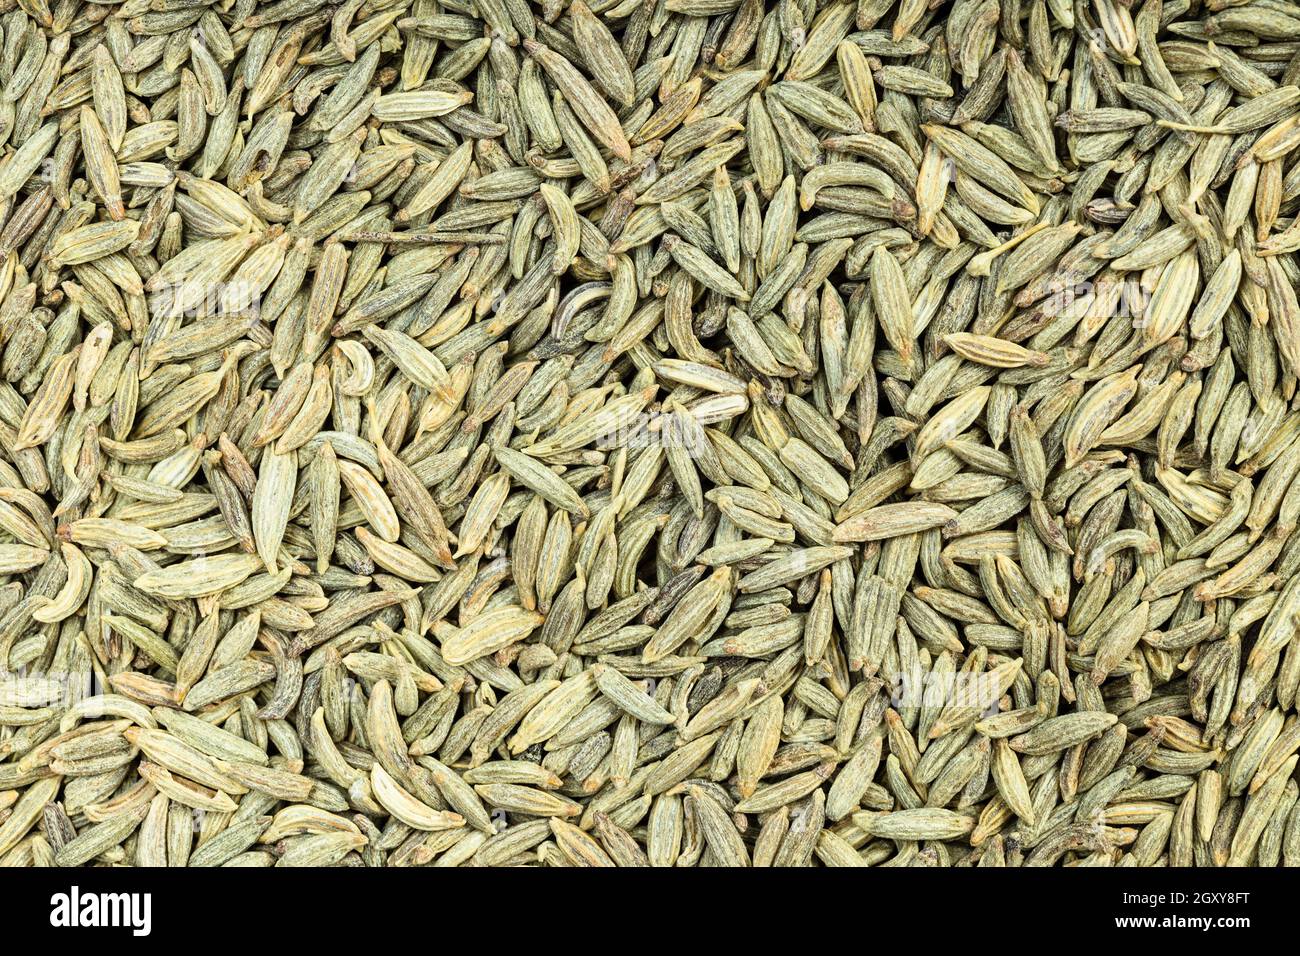 food background - many dried anise seeds Stock Photo